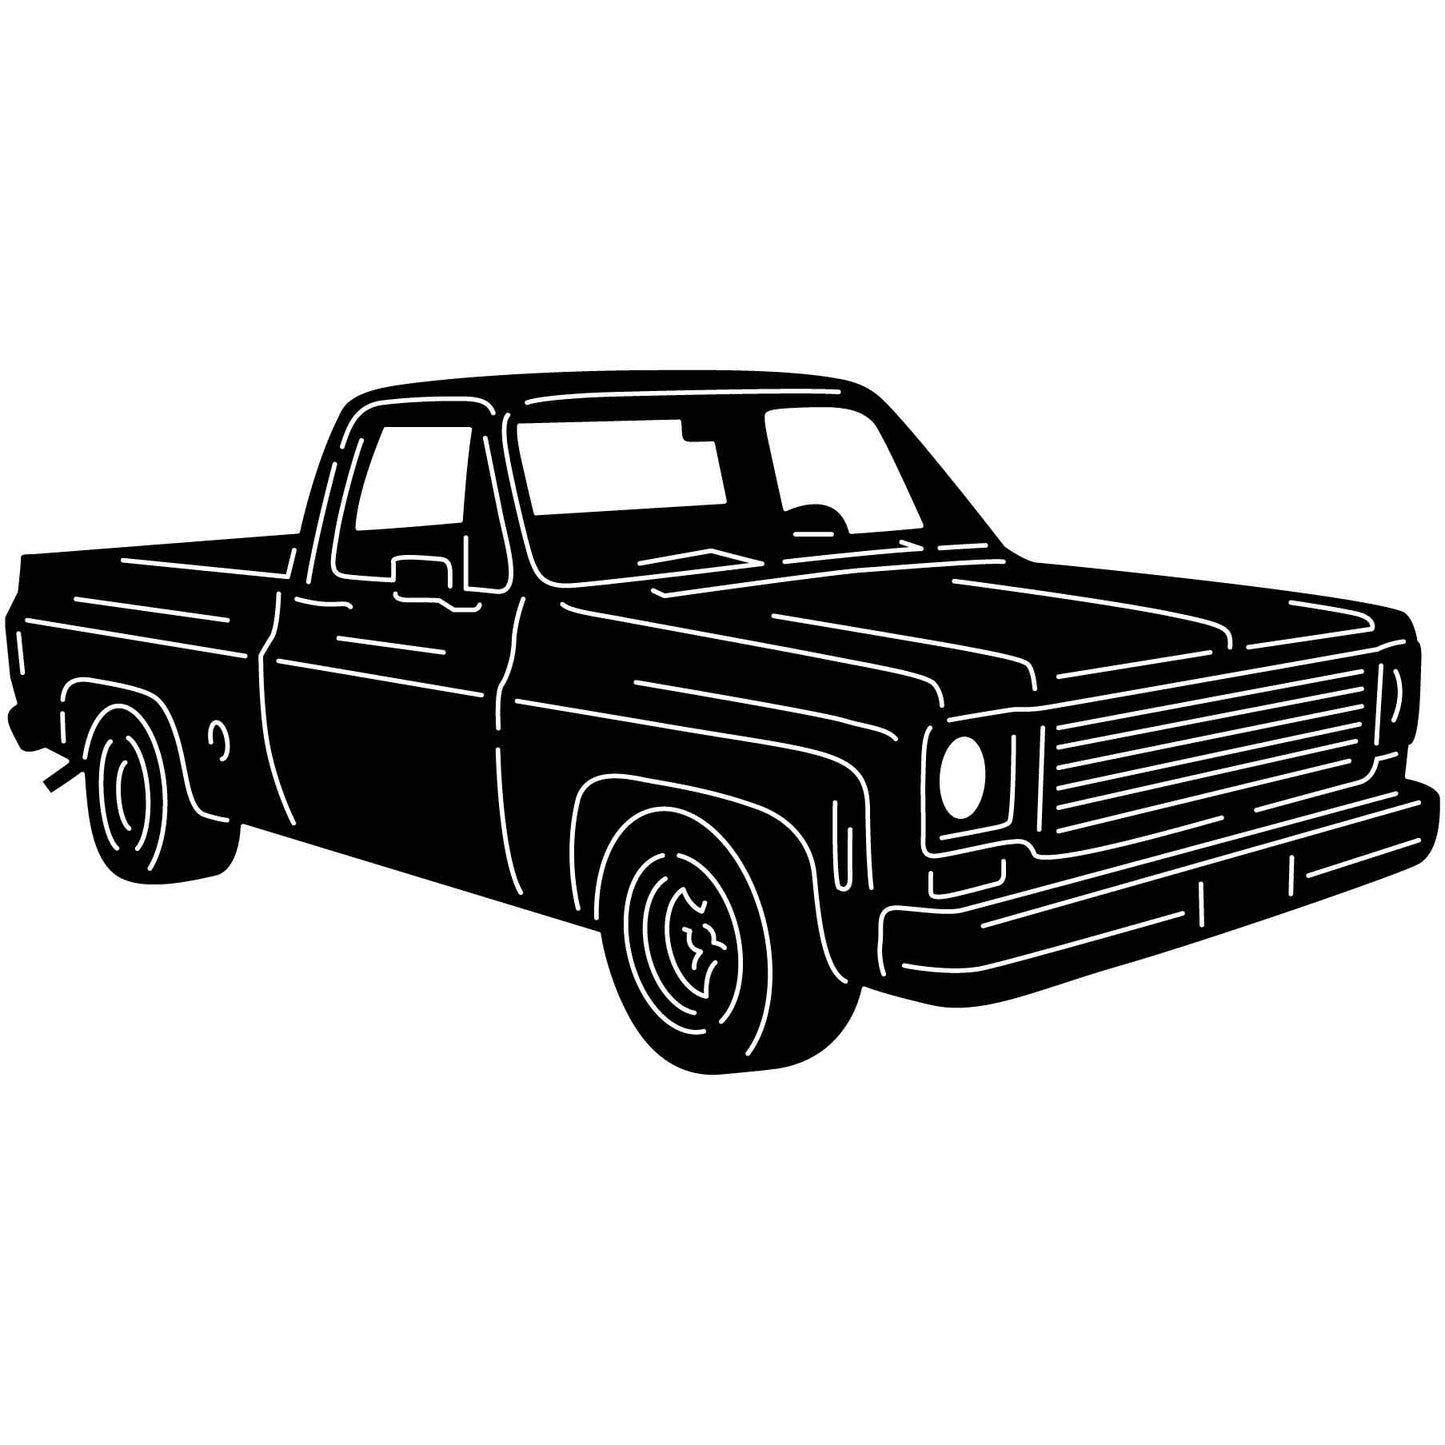 Chevy Truck-DXF File cut ready for CNC machines-dxfforcnc.com